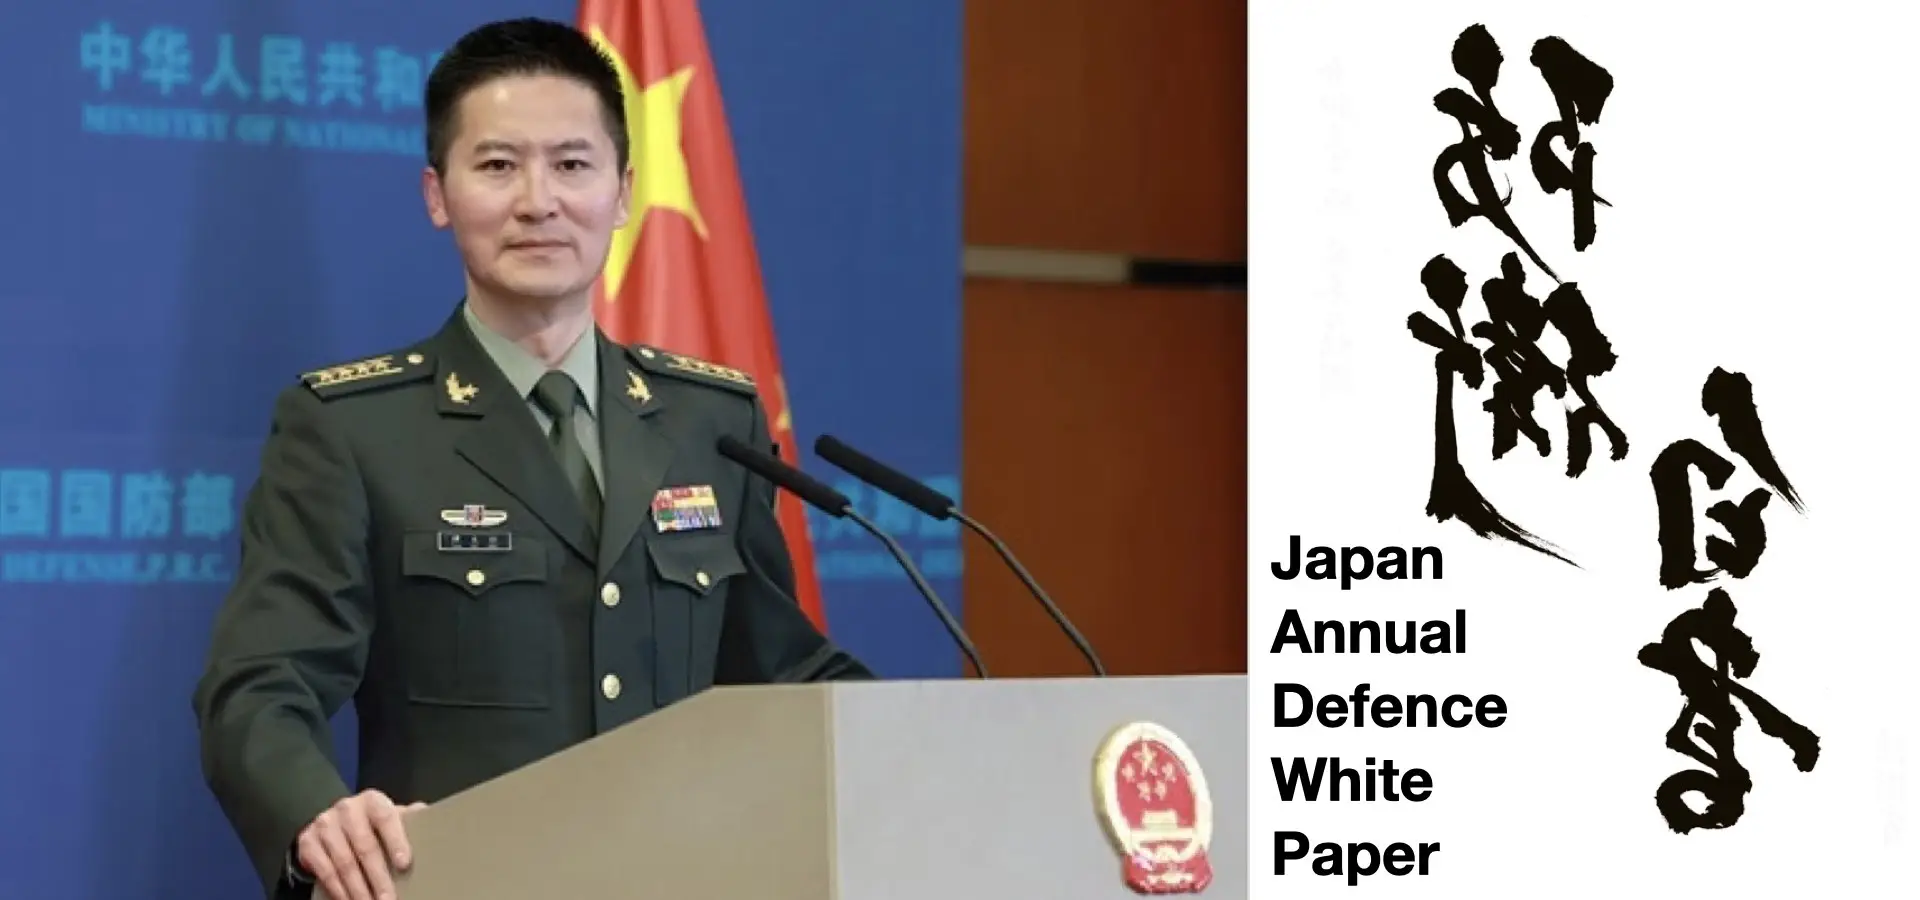 ‎Japan Annual Defence White Paper